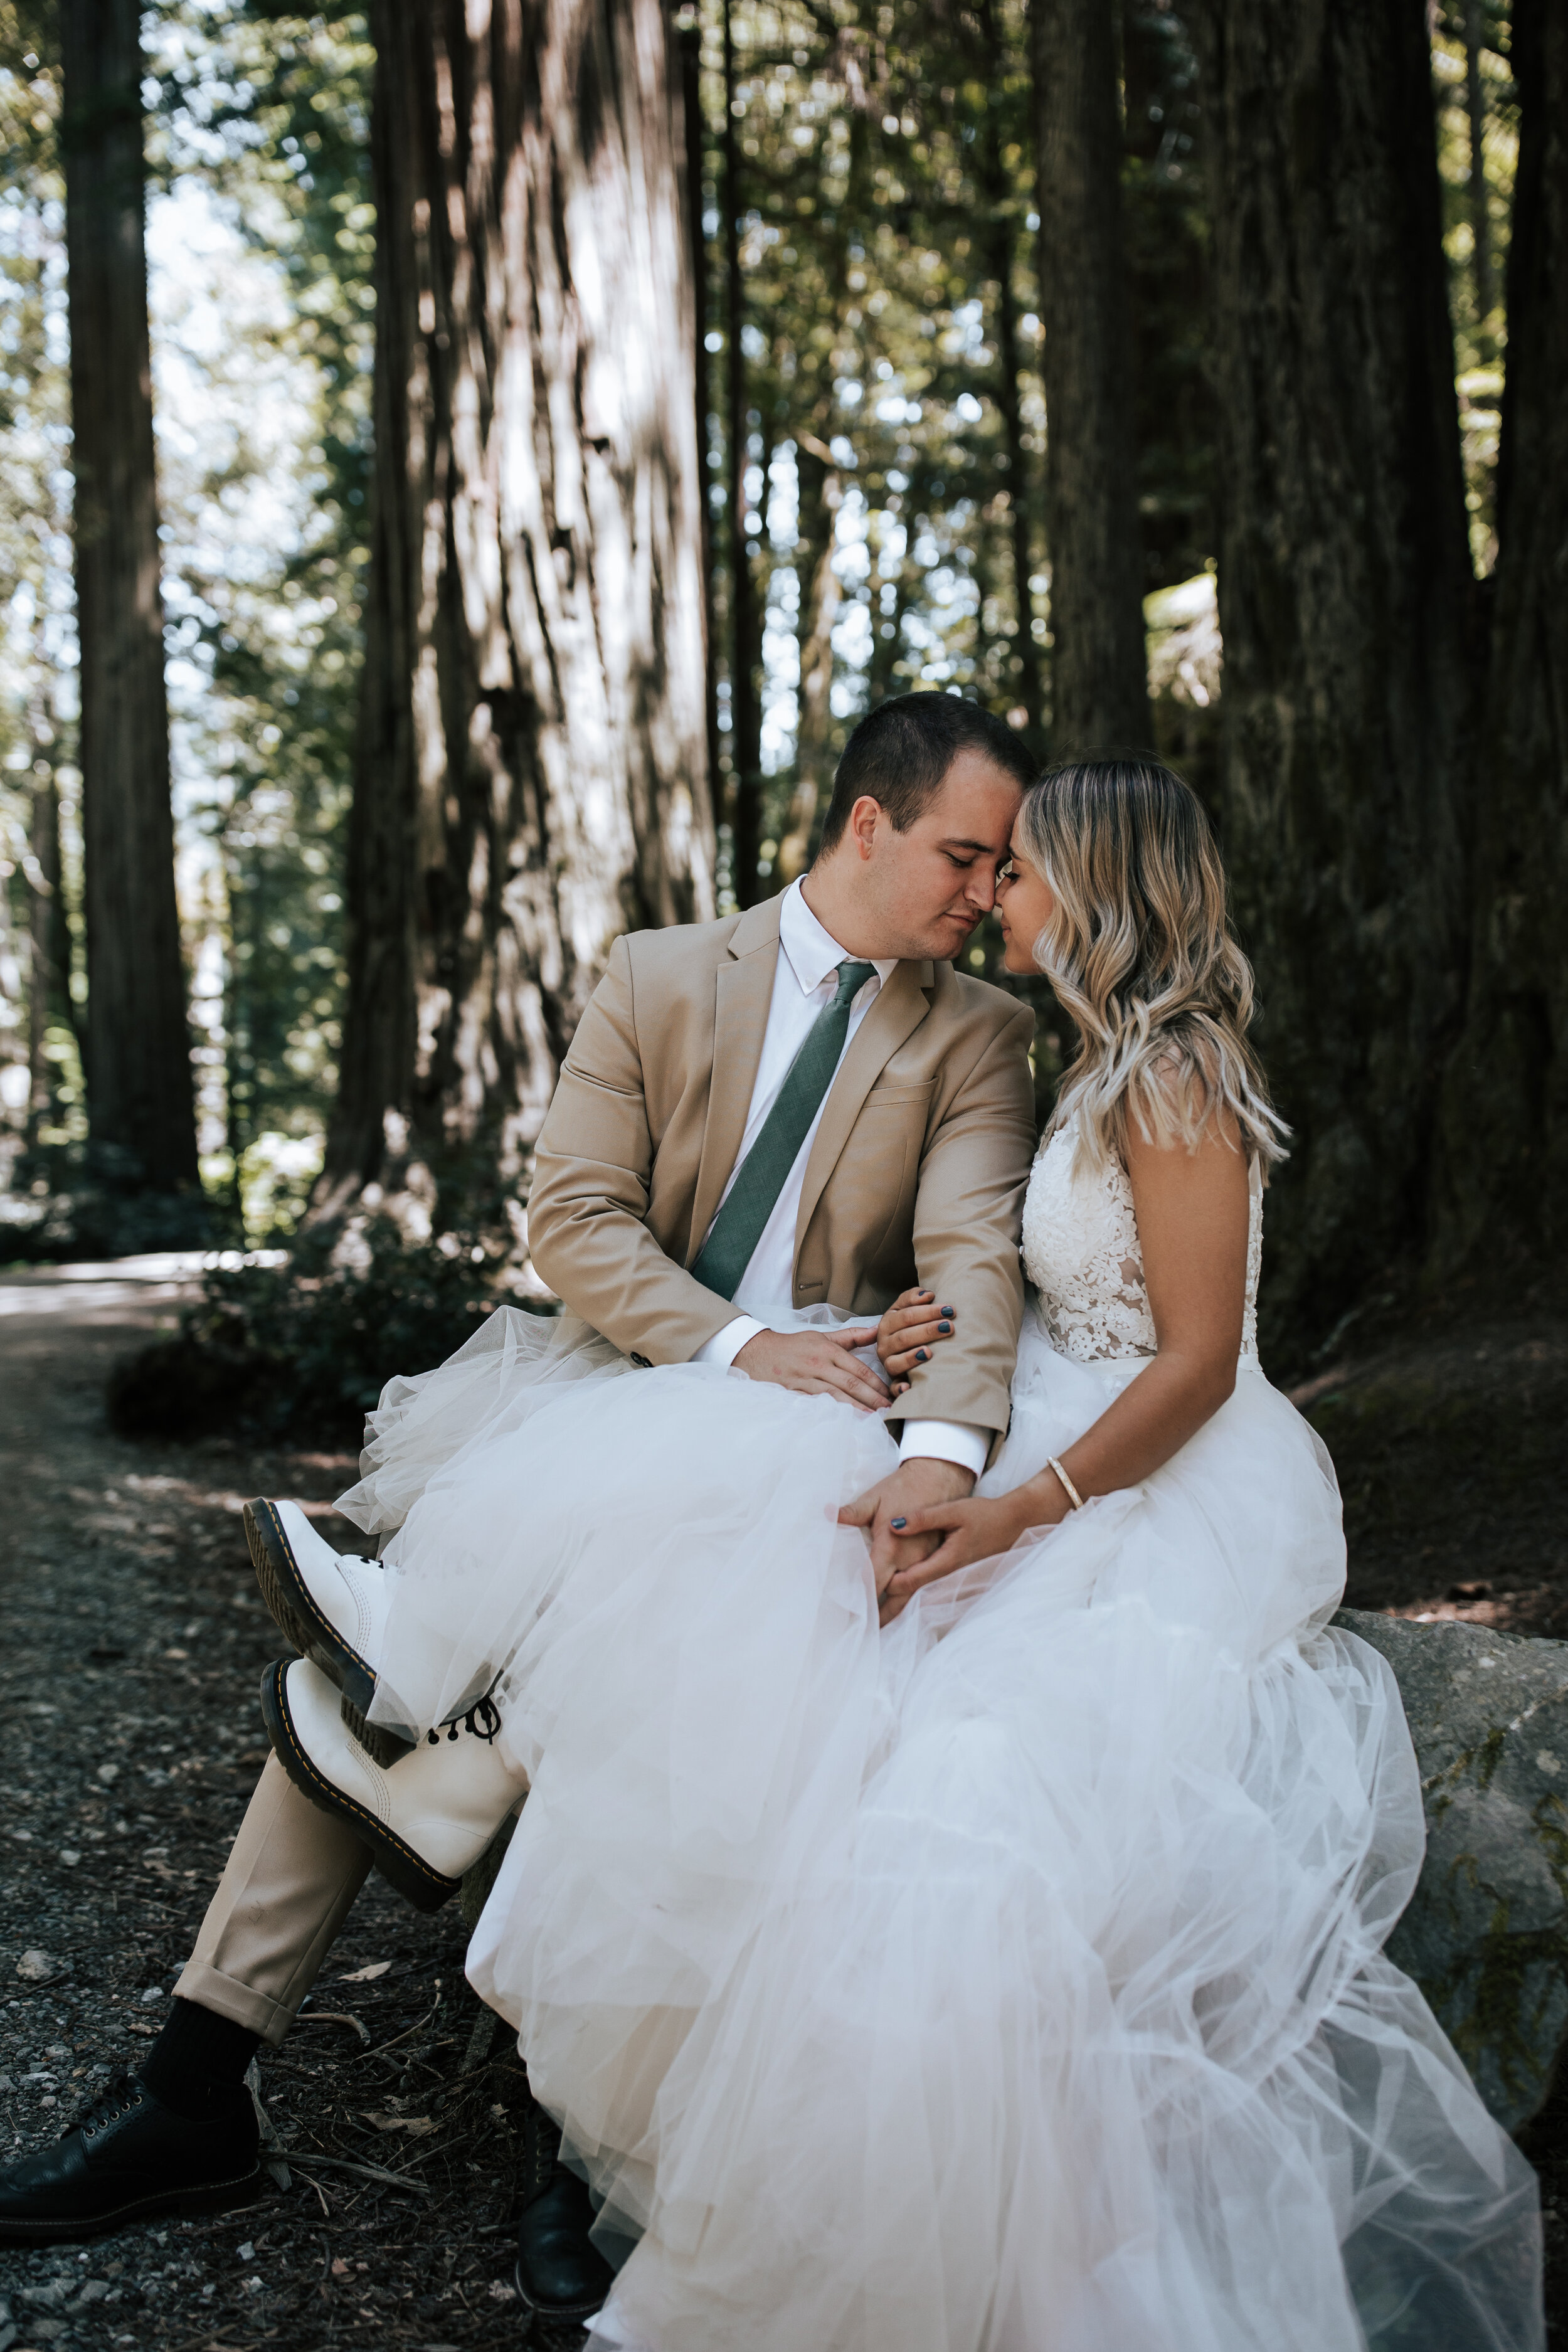  Bride and groom eloping in the Redwoods in California. Close up bride and groom. Redwoods elopement photographer wedding in Redwoods National Park. Elopement in the forest. #californiaphotographer #elopementphotographer #weddingphotographer #redwood